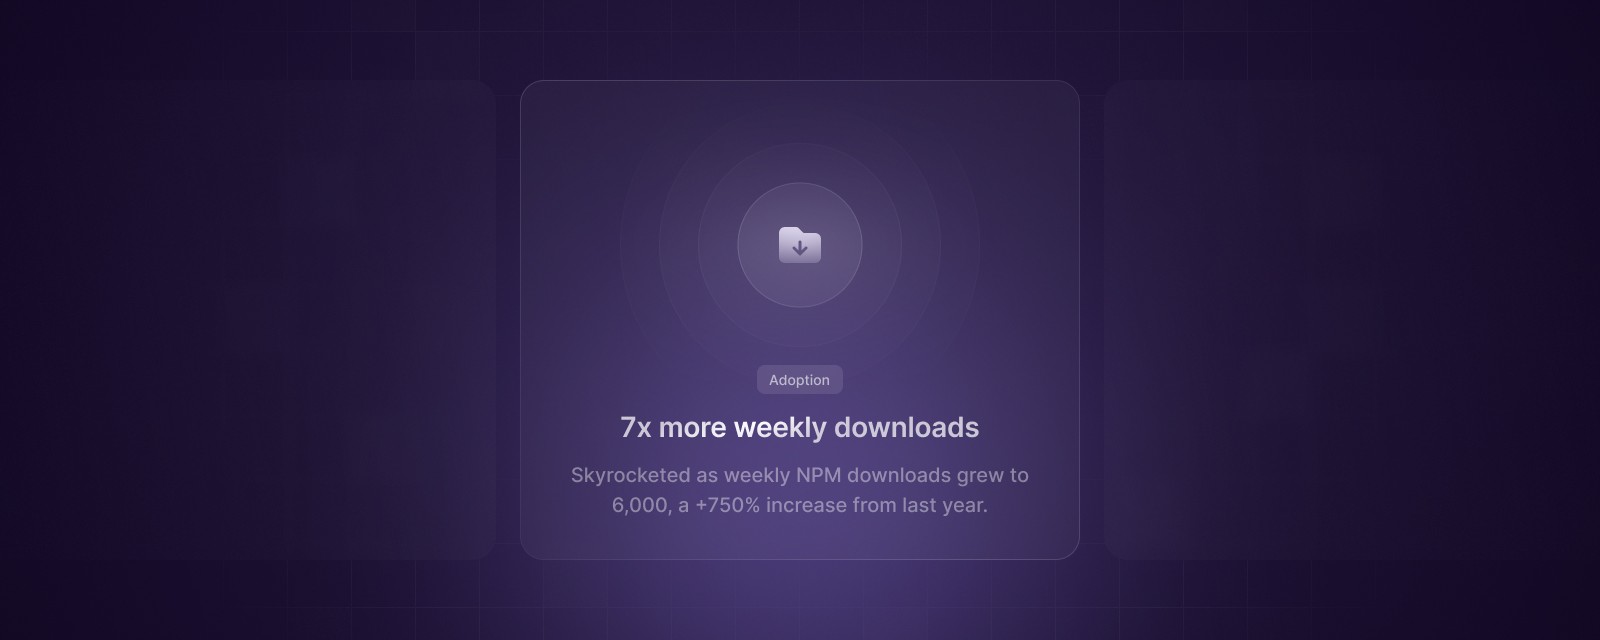 7x more weekly downloads
